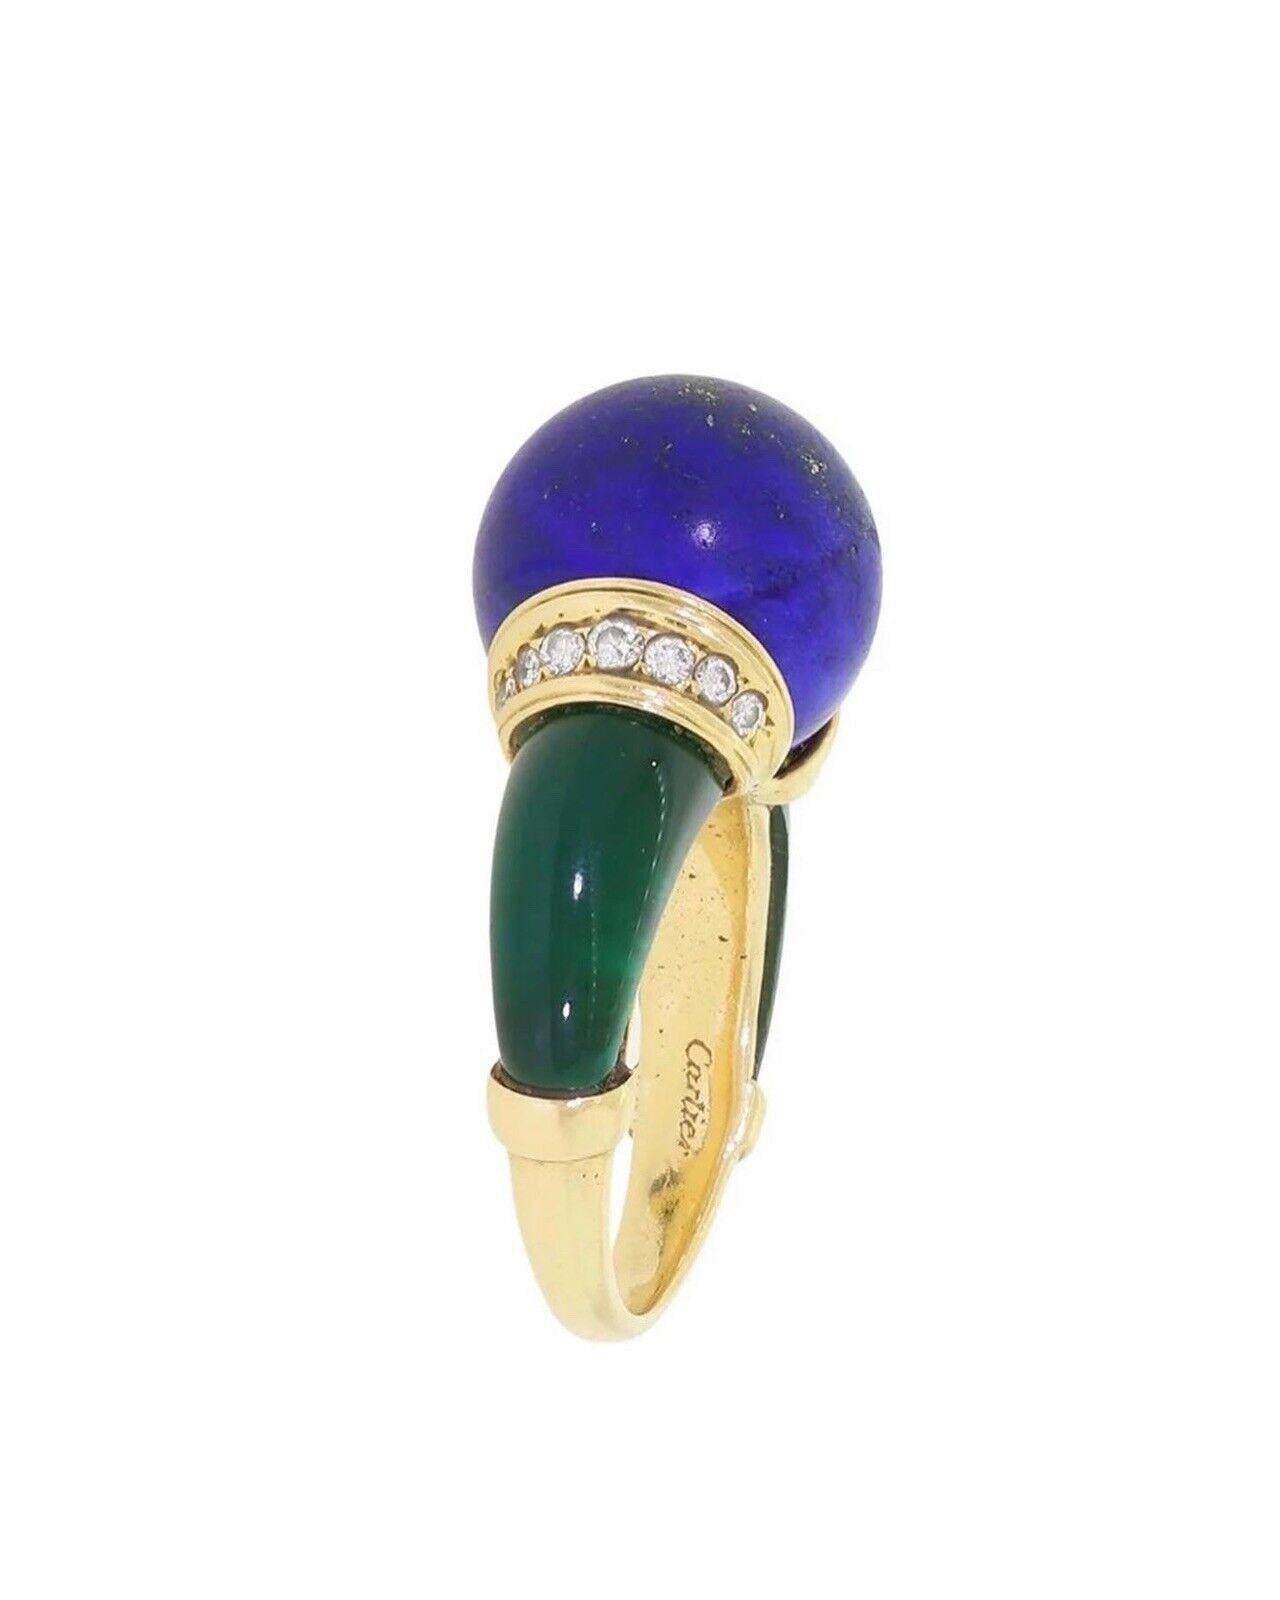 Cartier 18k Yellow Gold, Lapis, Diamond & Chrysoprase Egyptian Revival Ring.



Here is your chance to purchase a beautiful and highly collectible designer vintage ring. Truly a great piece at a great price!


Maker: Cartier

Markings: Cartier - The